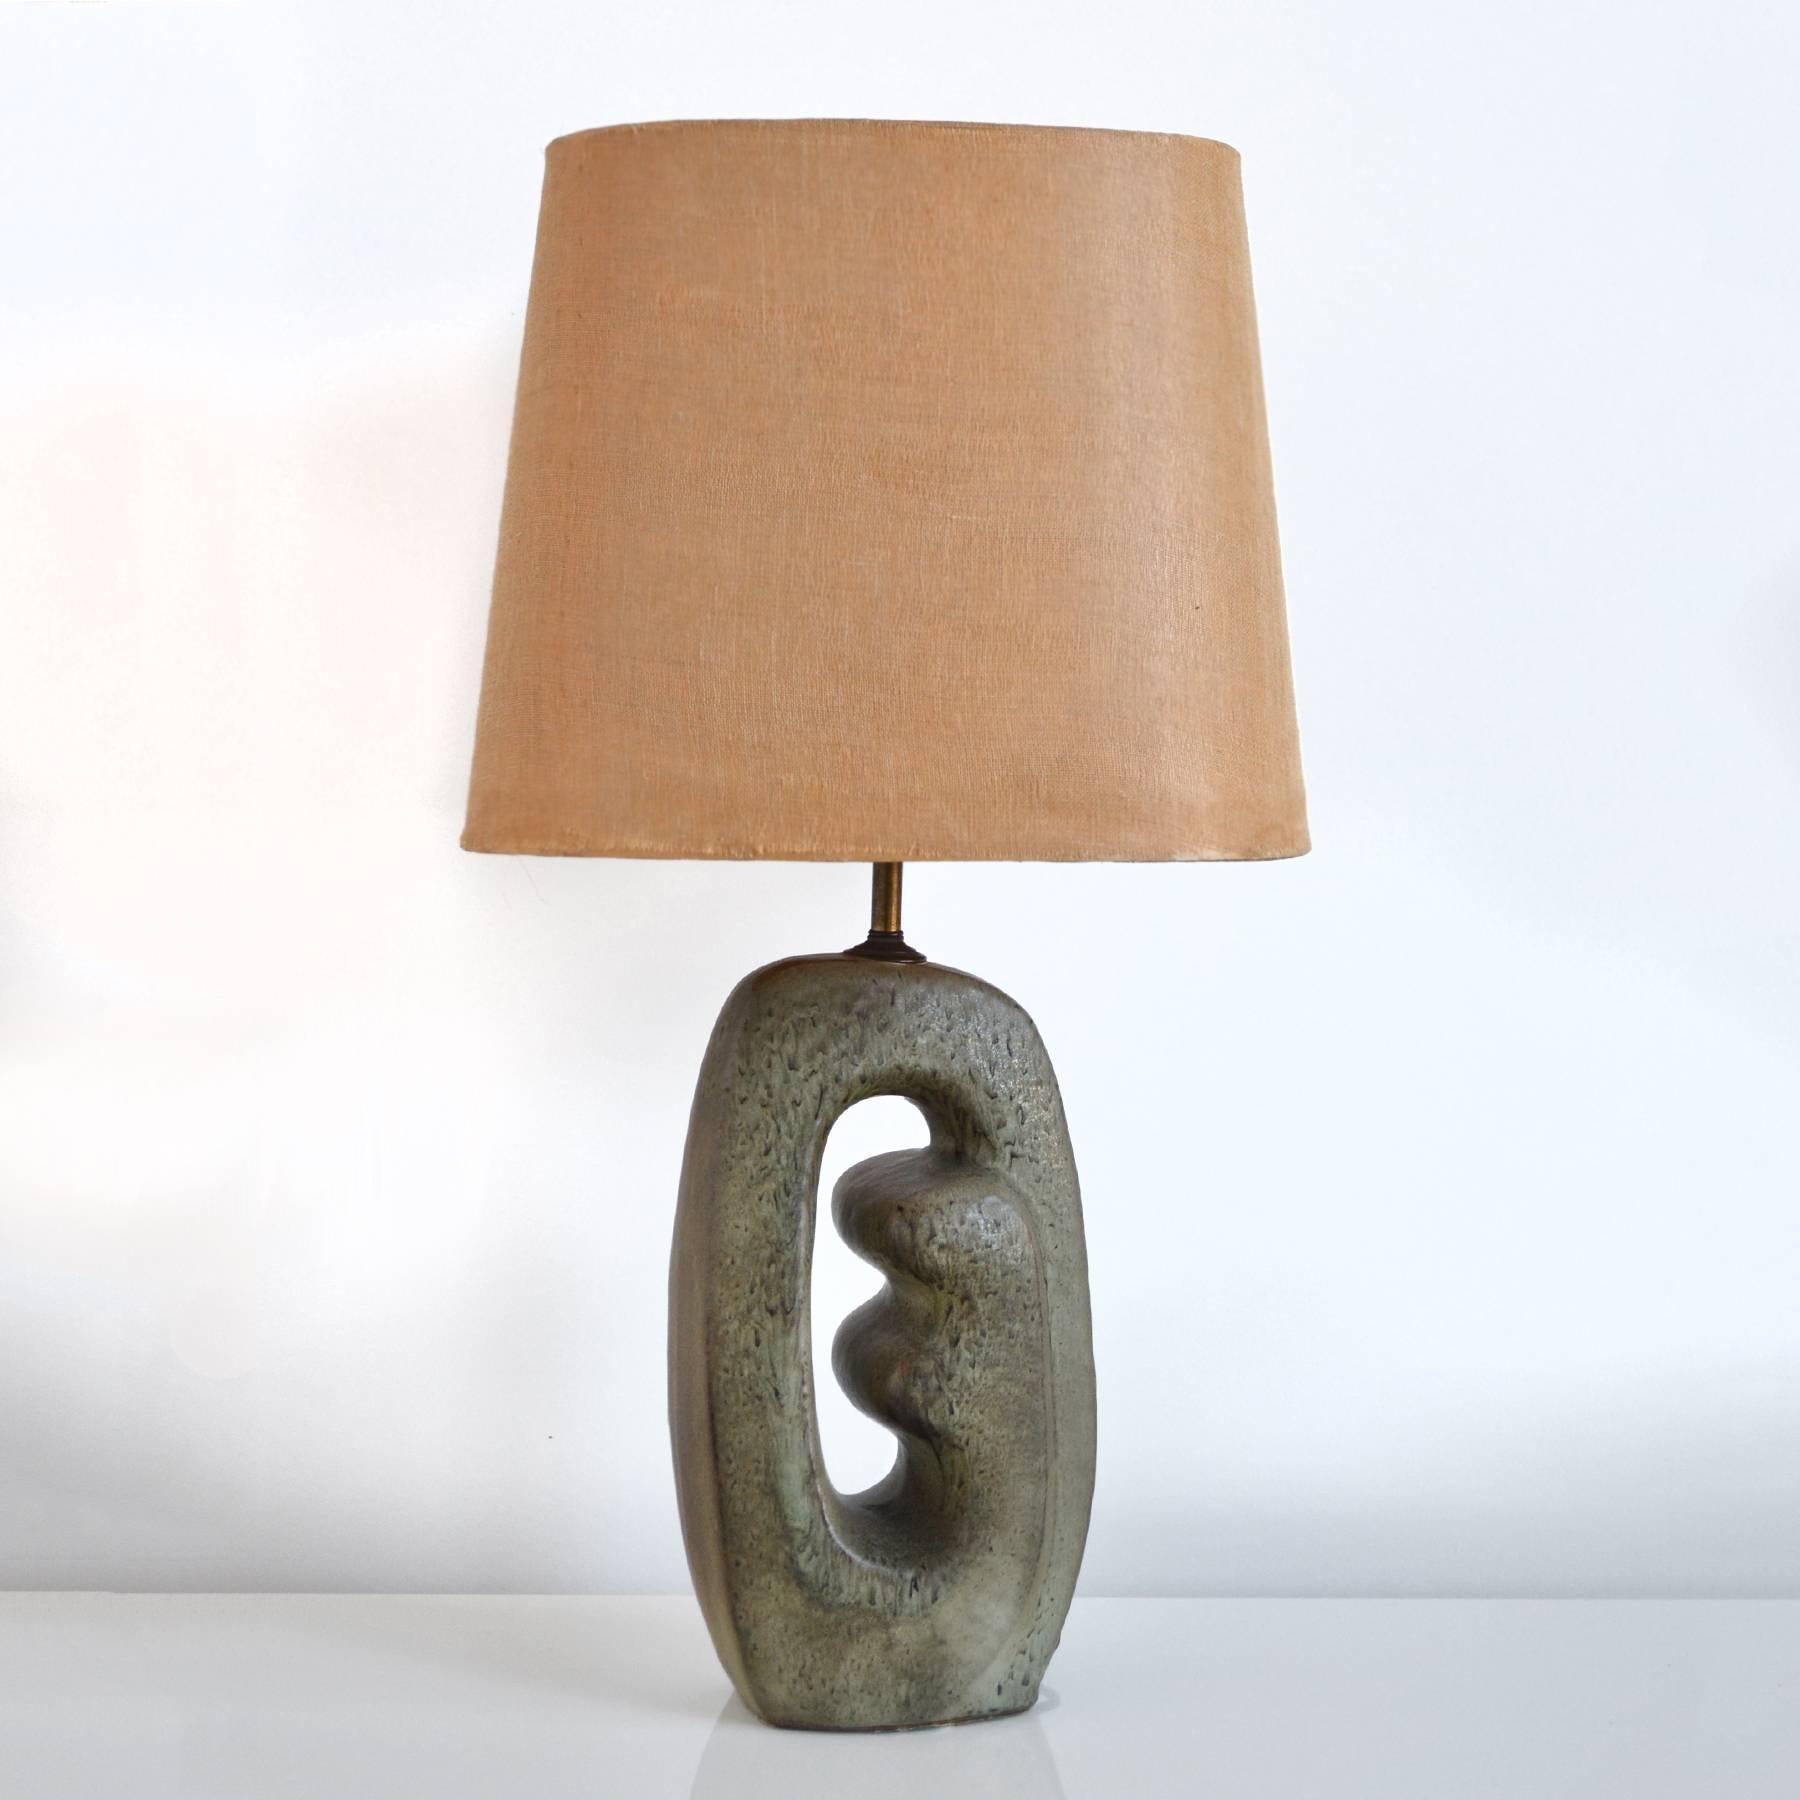 This wonderful lamp from the 1950s has a beautiful ceramic base. The abstract form features a terrific mottled glaze and the shape reminds us of the sculptures of Isamu Noguchi and Henry Moore.

Lamp is sold sans shade. The original shade shows